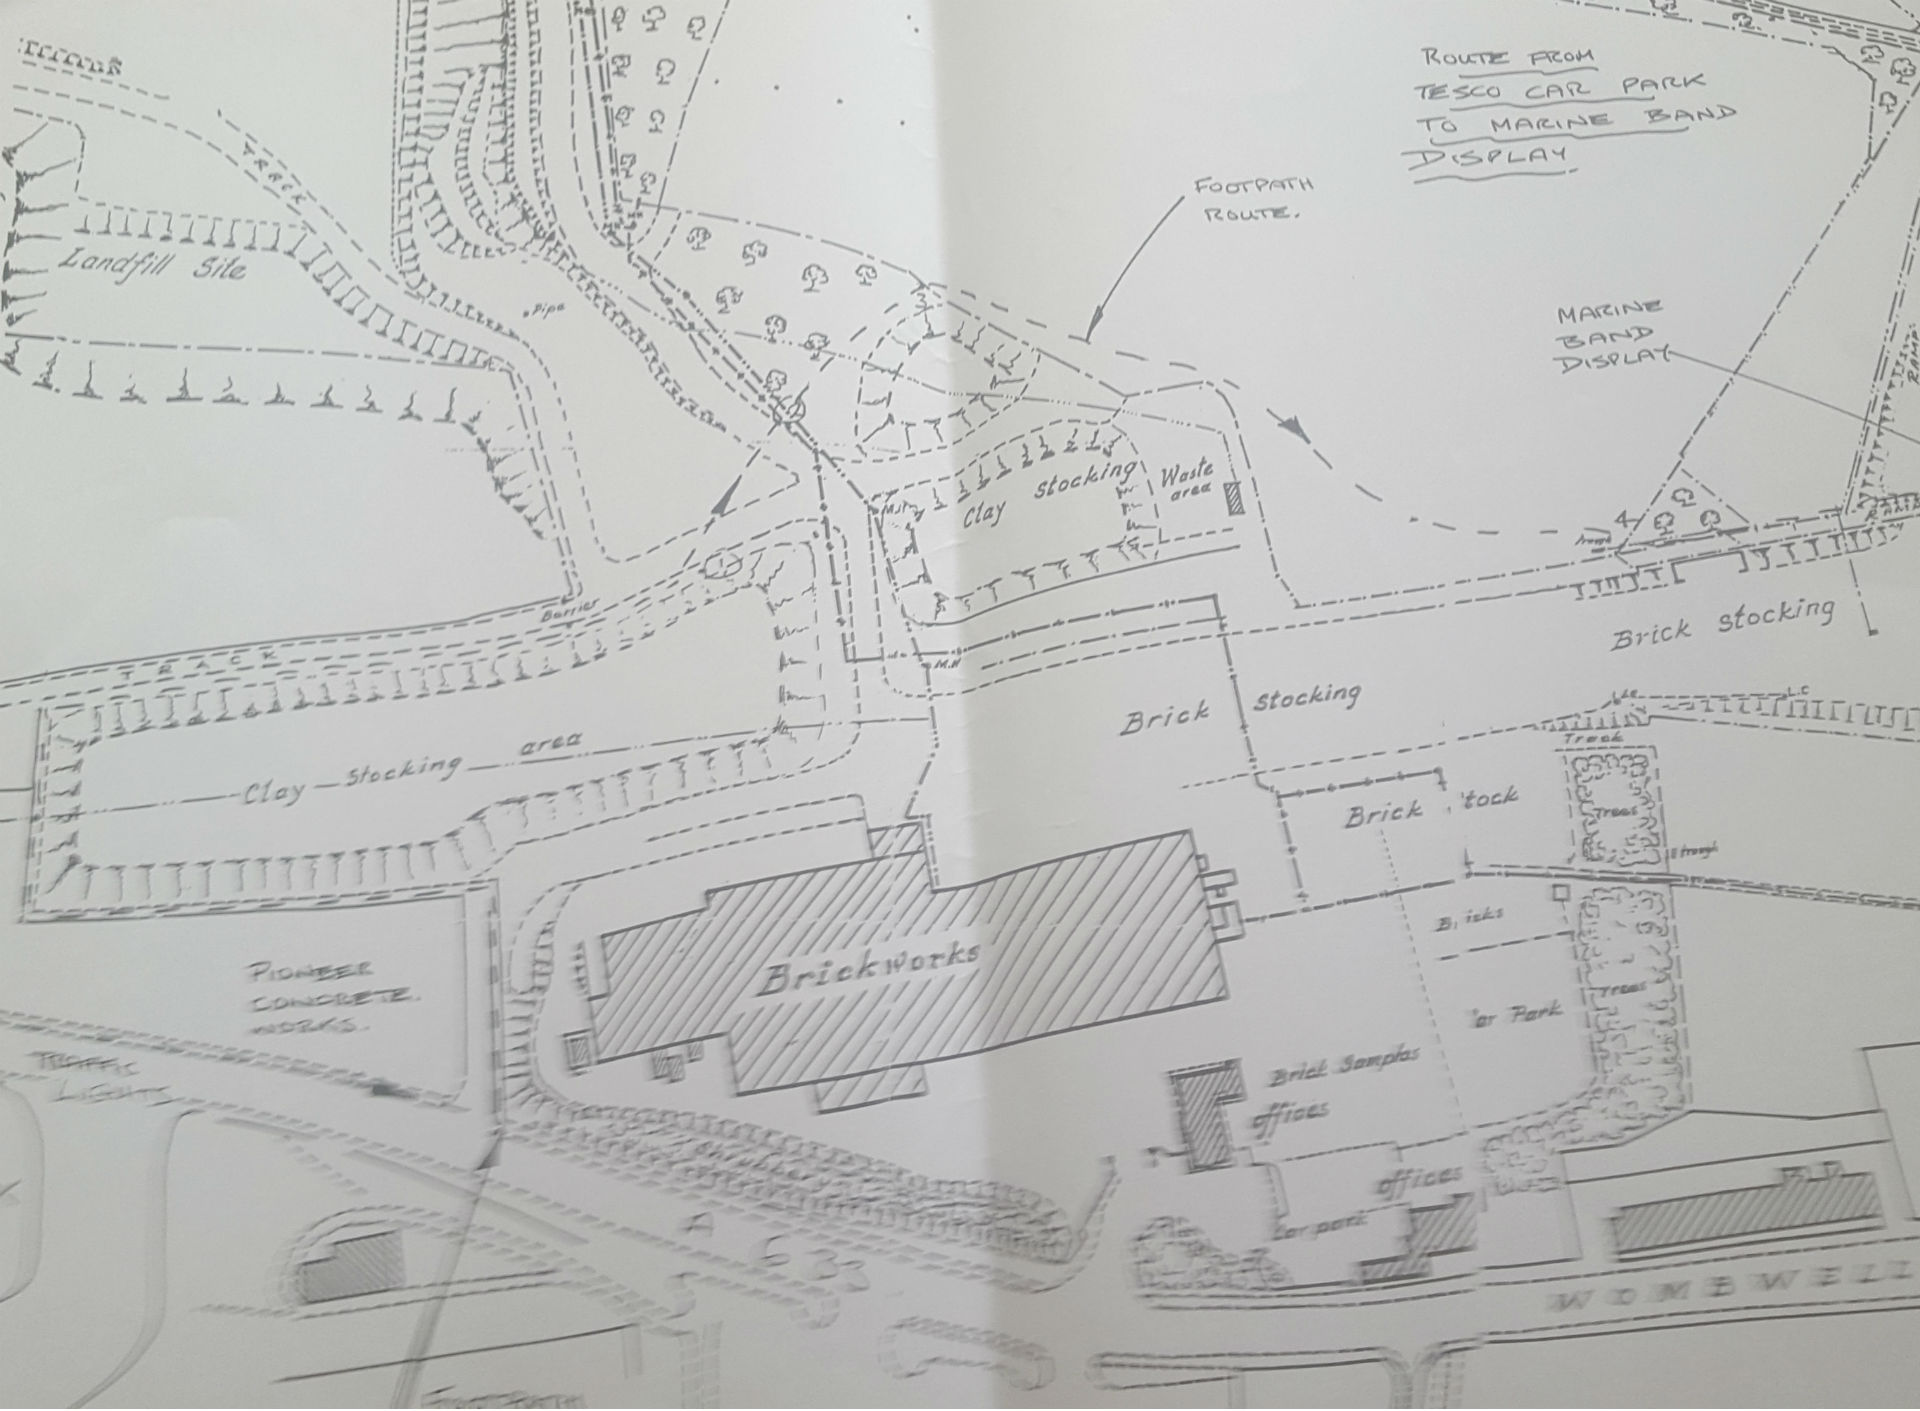 Site plan of Stairfoot Brickworks circa late 1980s